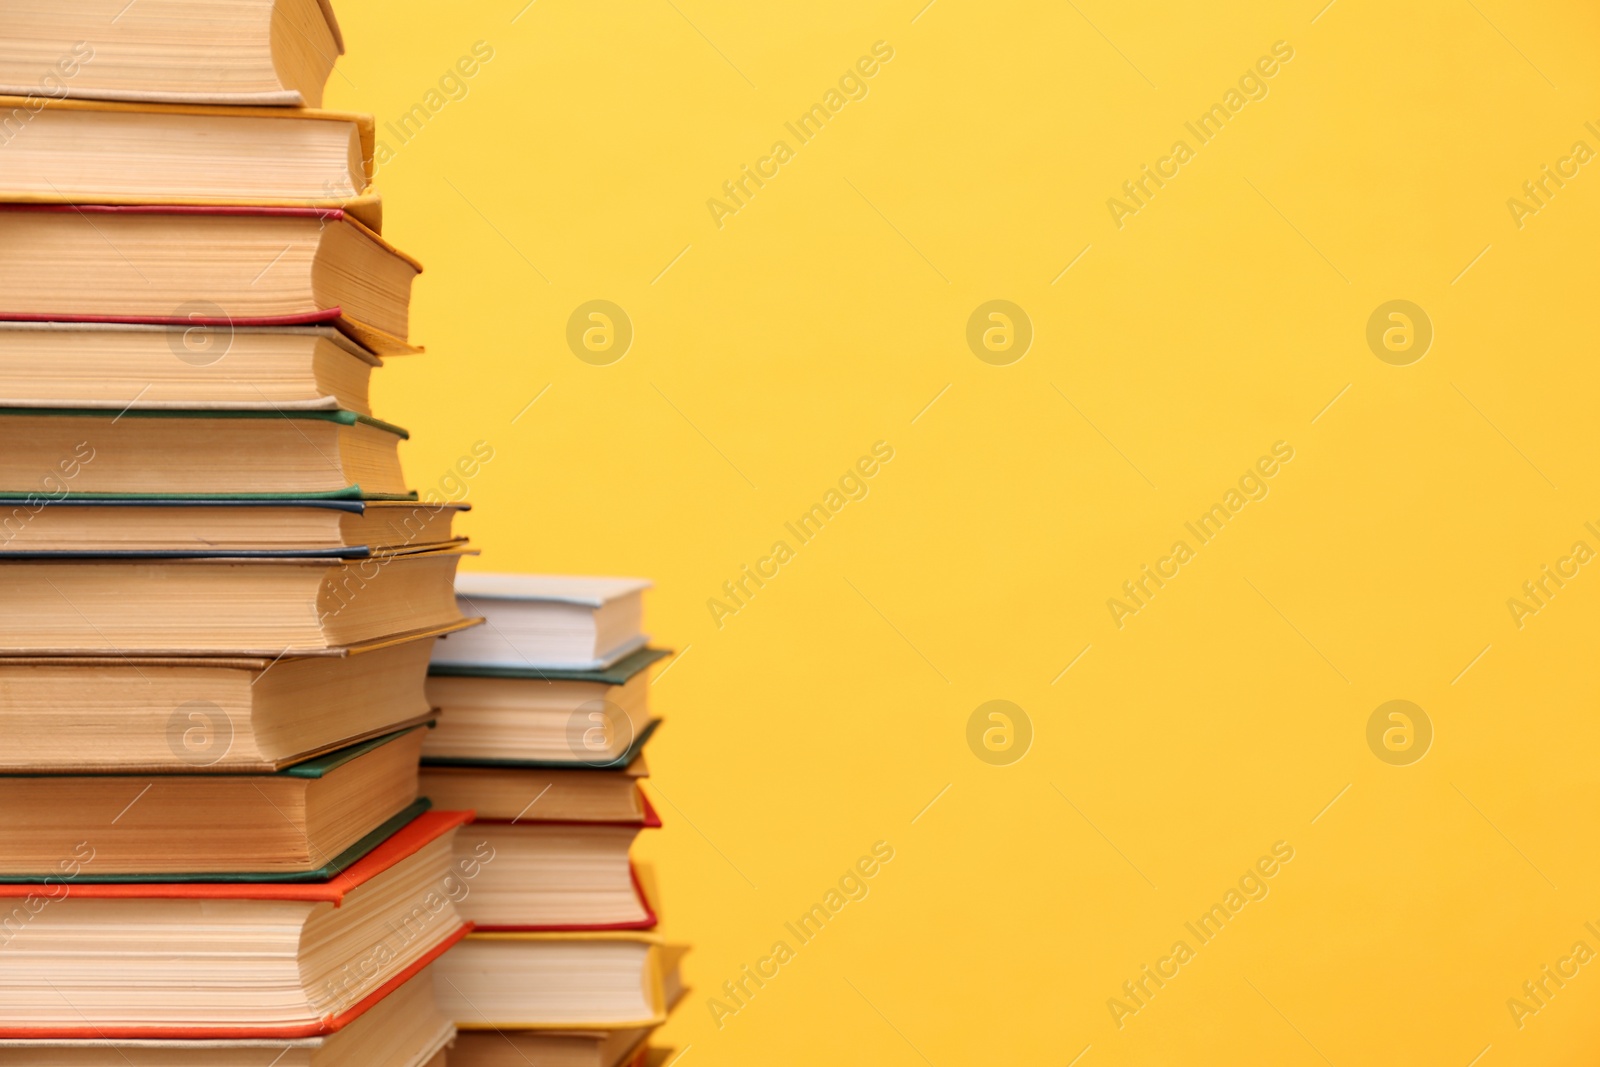 Photo of Many hardcover books on orange background, space for text. Library material